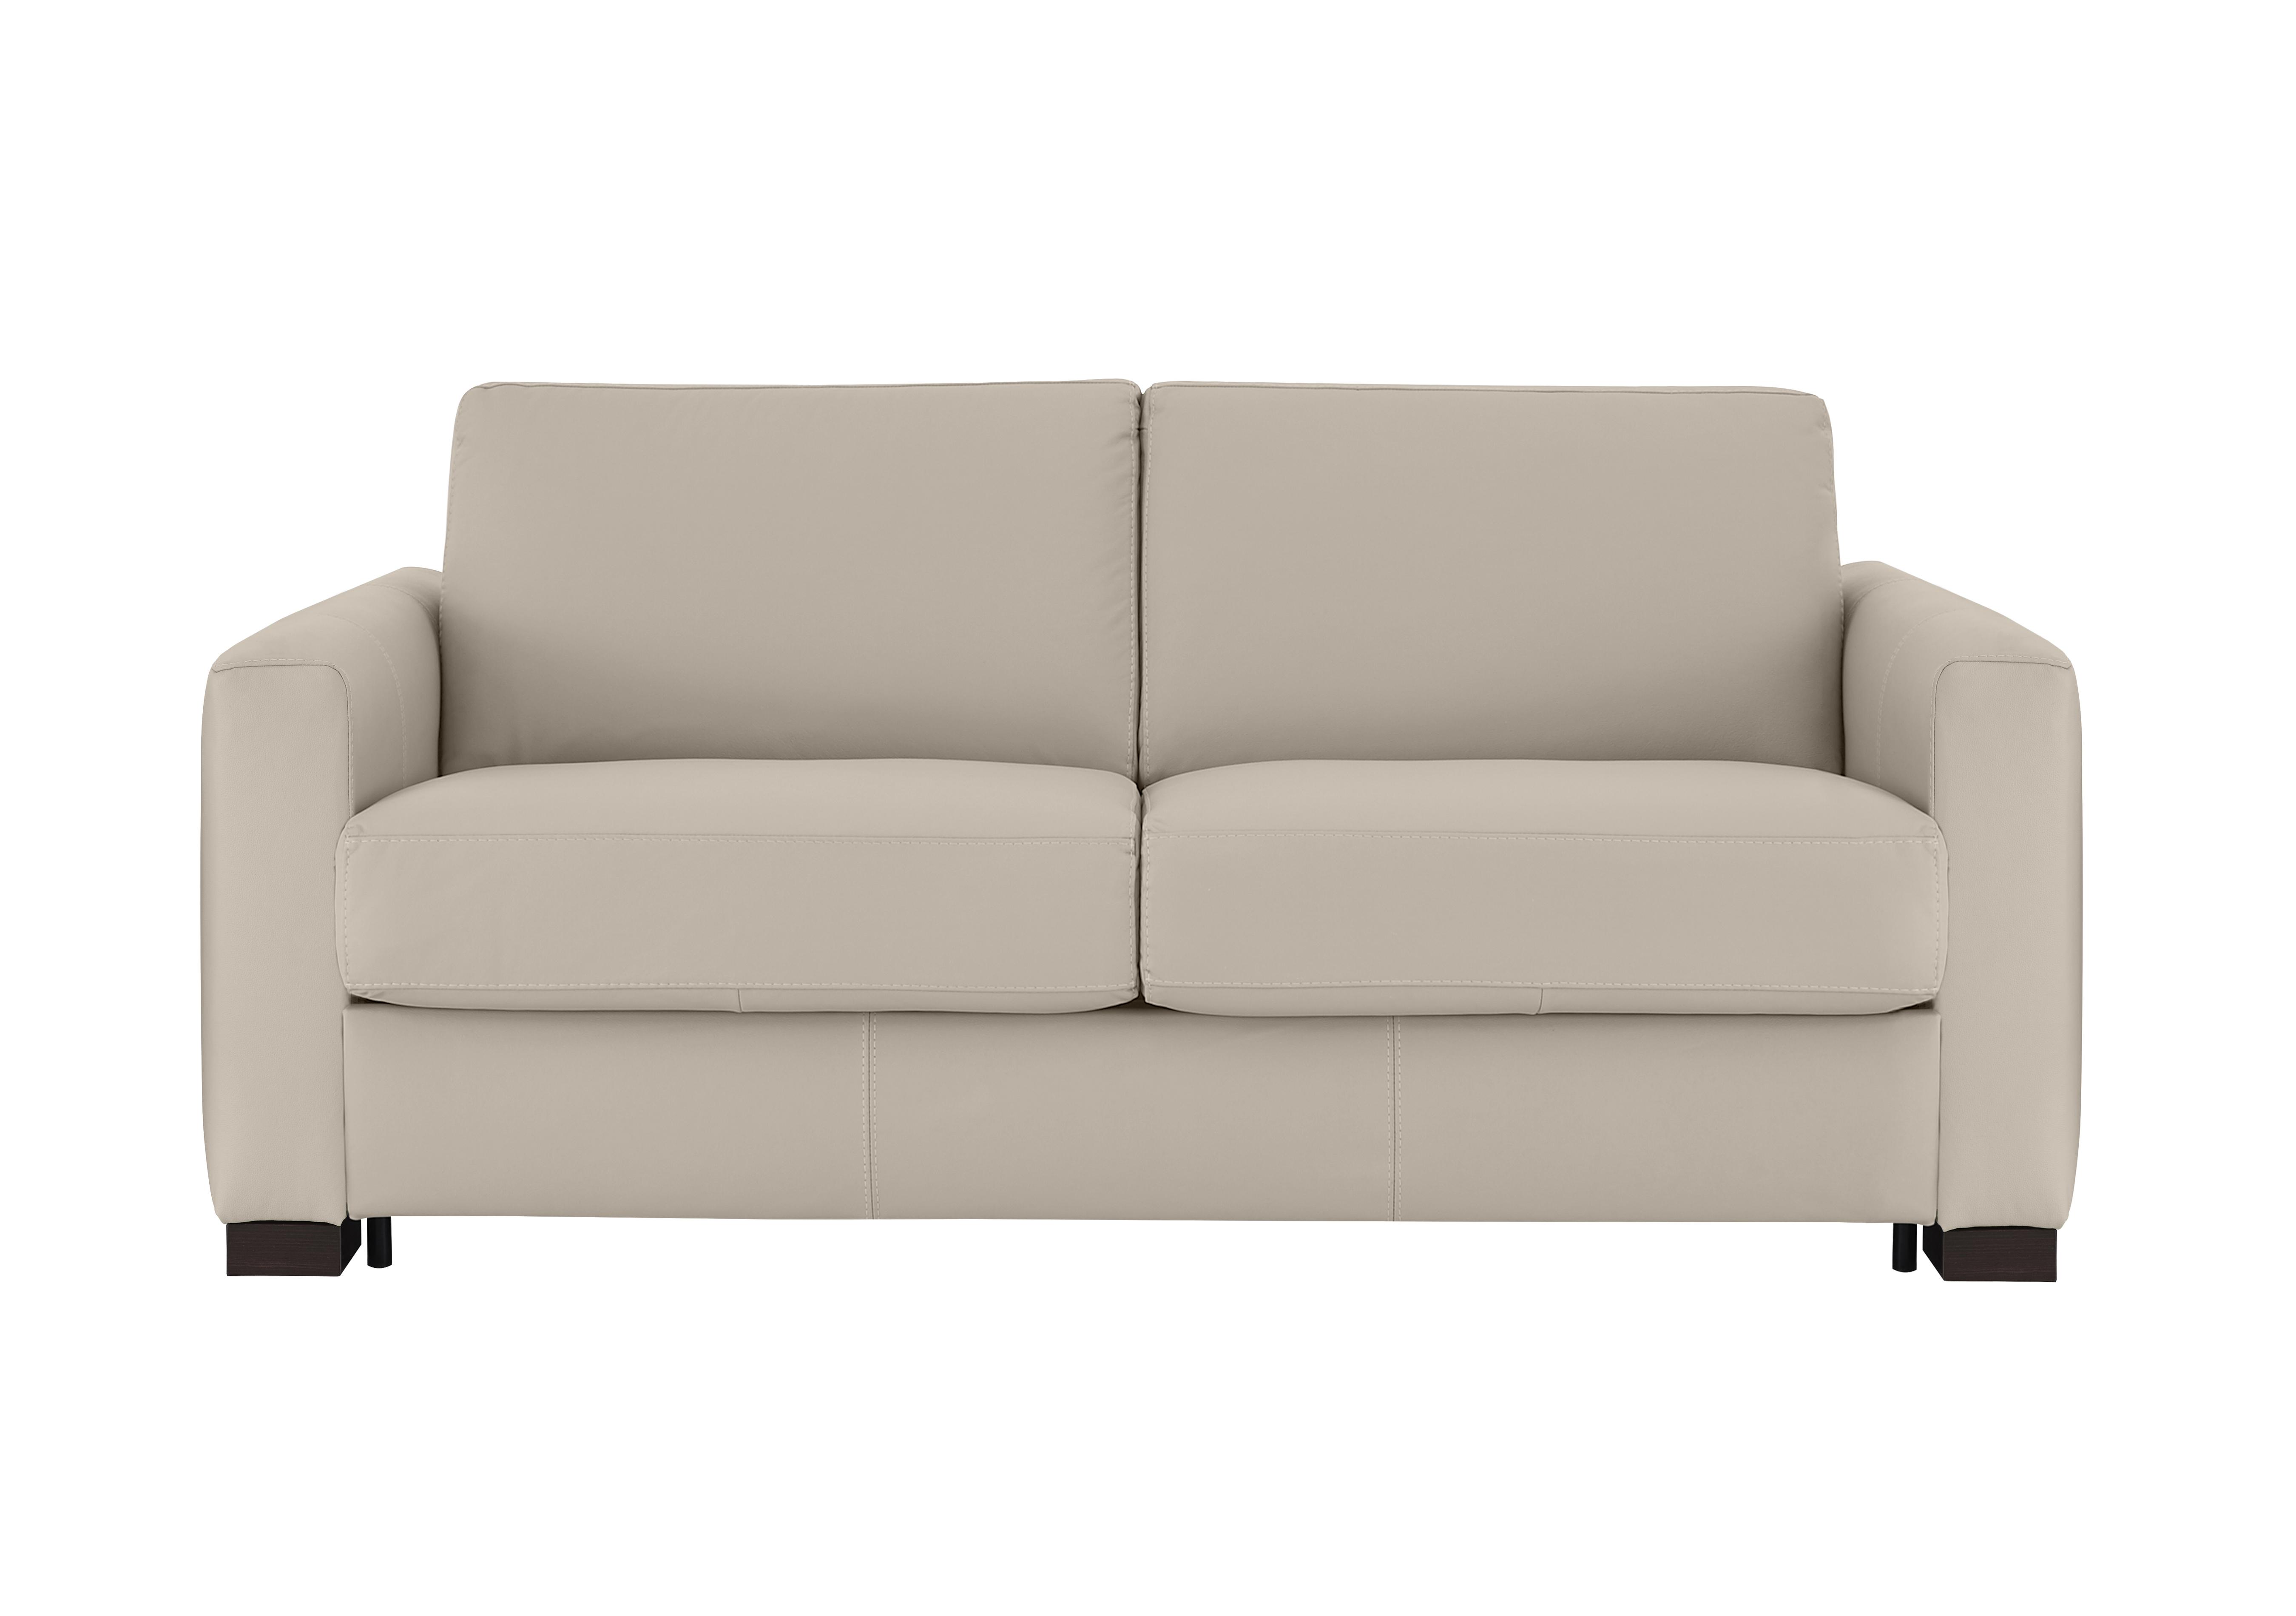 Alcova 2.5 Seater Leather Sofa Bed with Box Arms in Botero Crema 2156 on Furniture Village